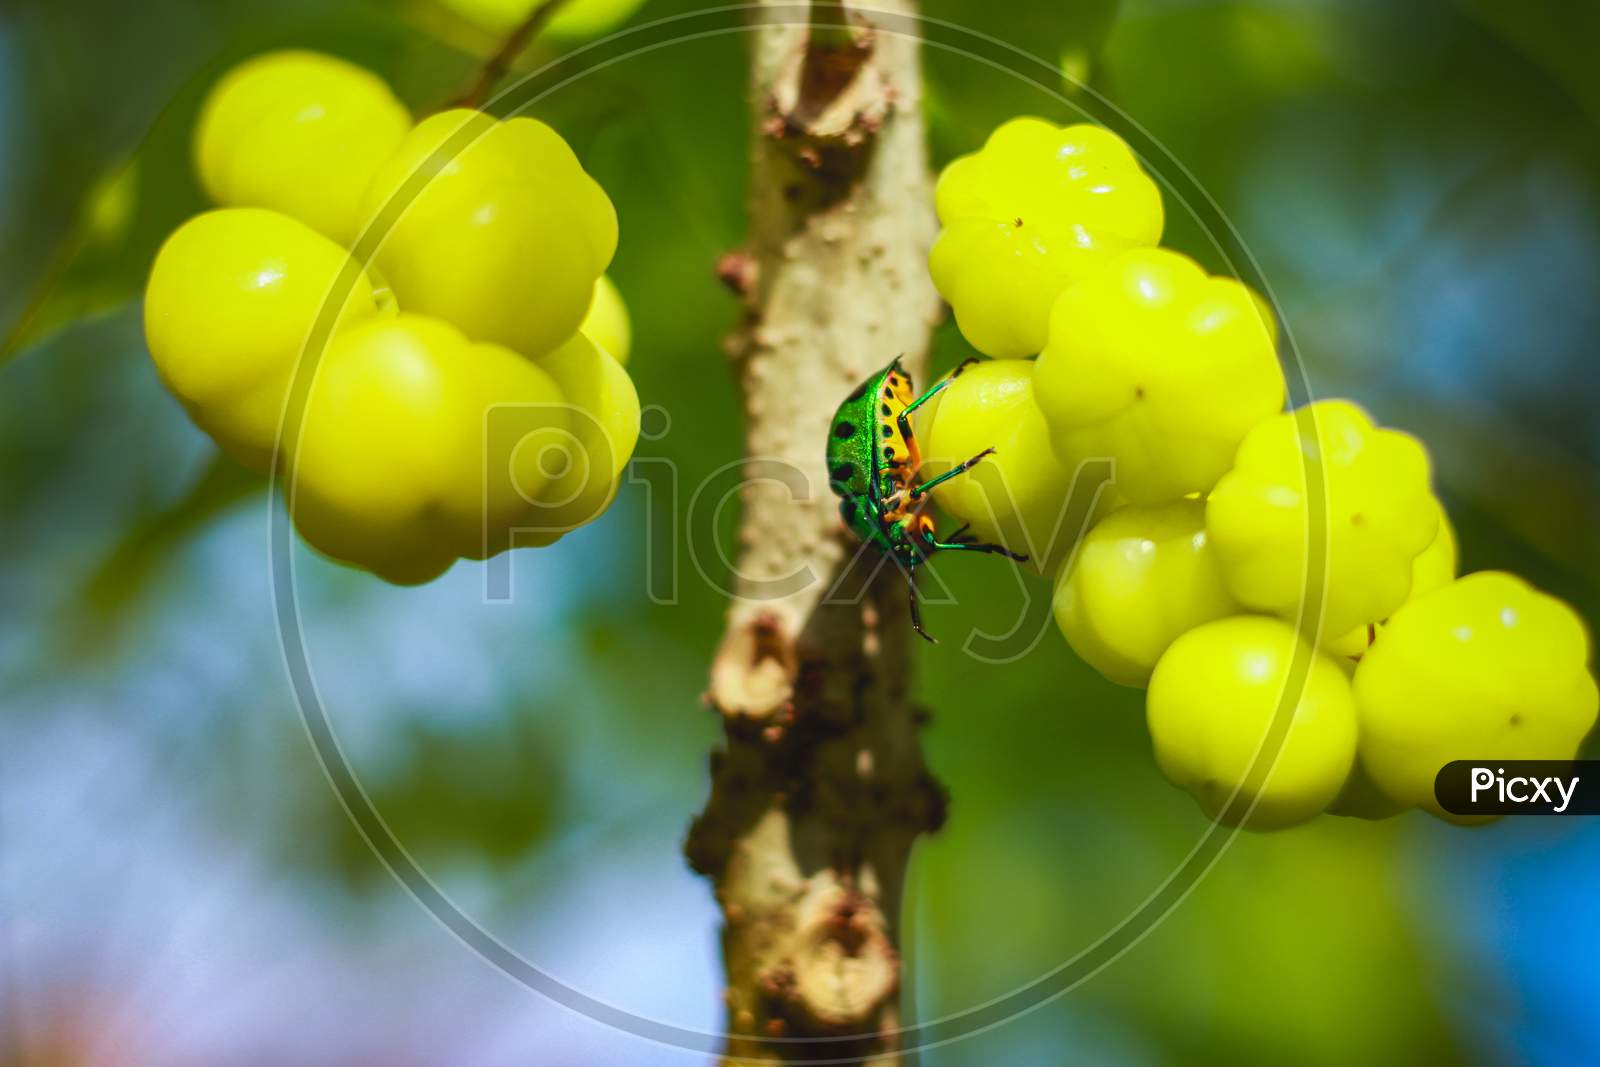 Jewel Bug Beetle On Star Gooseberry Tree, Lychee Shield Is Also Called As Chrysocoris Stollii. Scutelleridae Is A Family Of True Bugs. Lychee Shield Bug. Phyllanthus Acidus Tree.